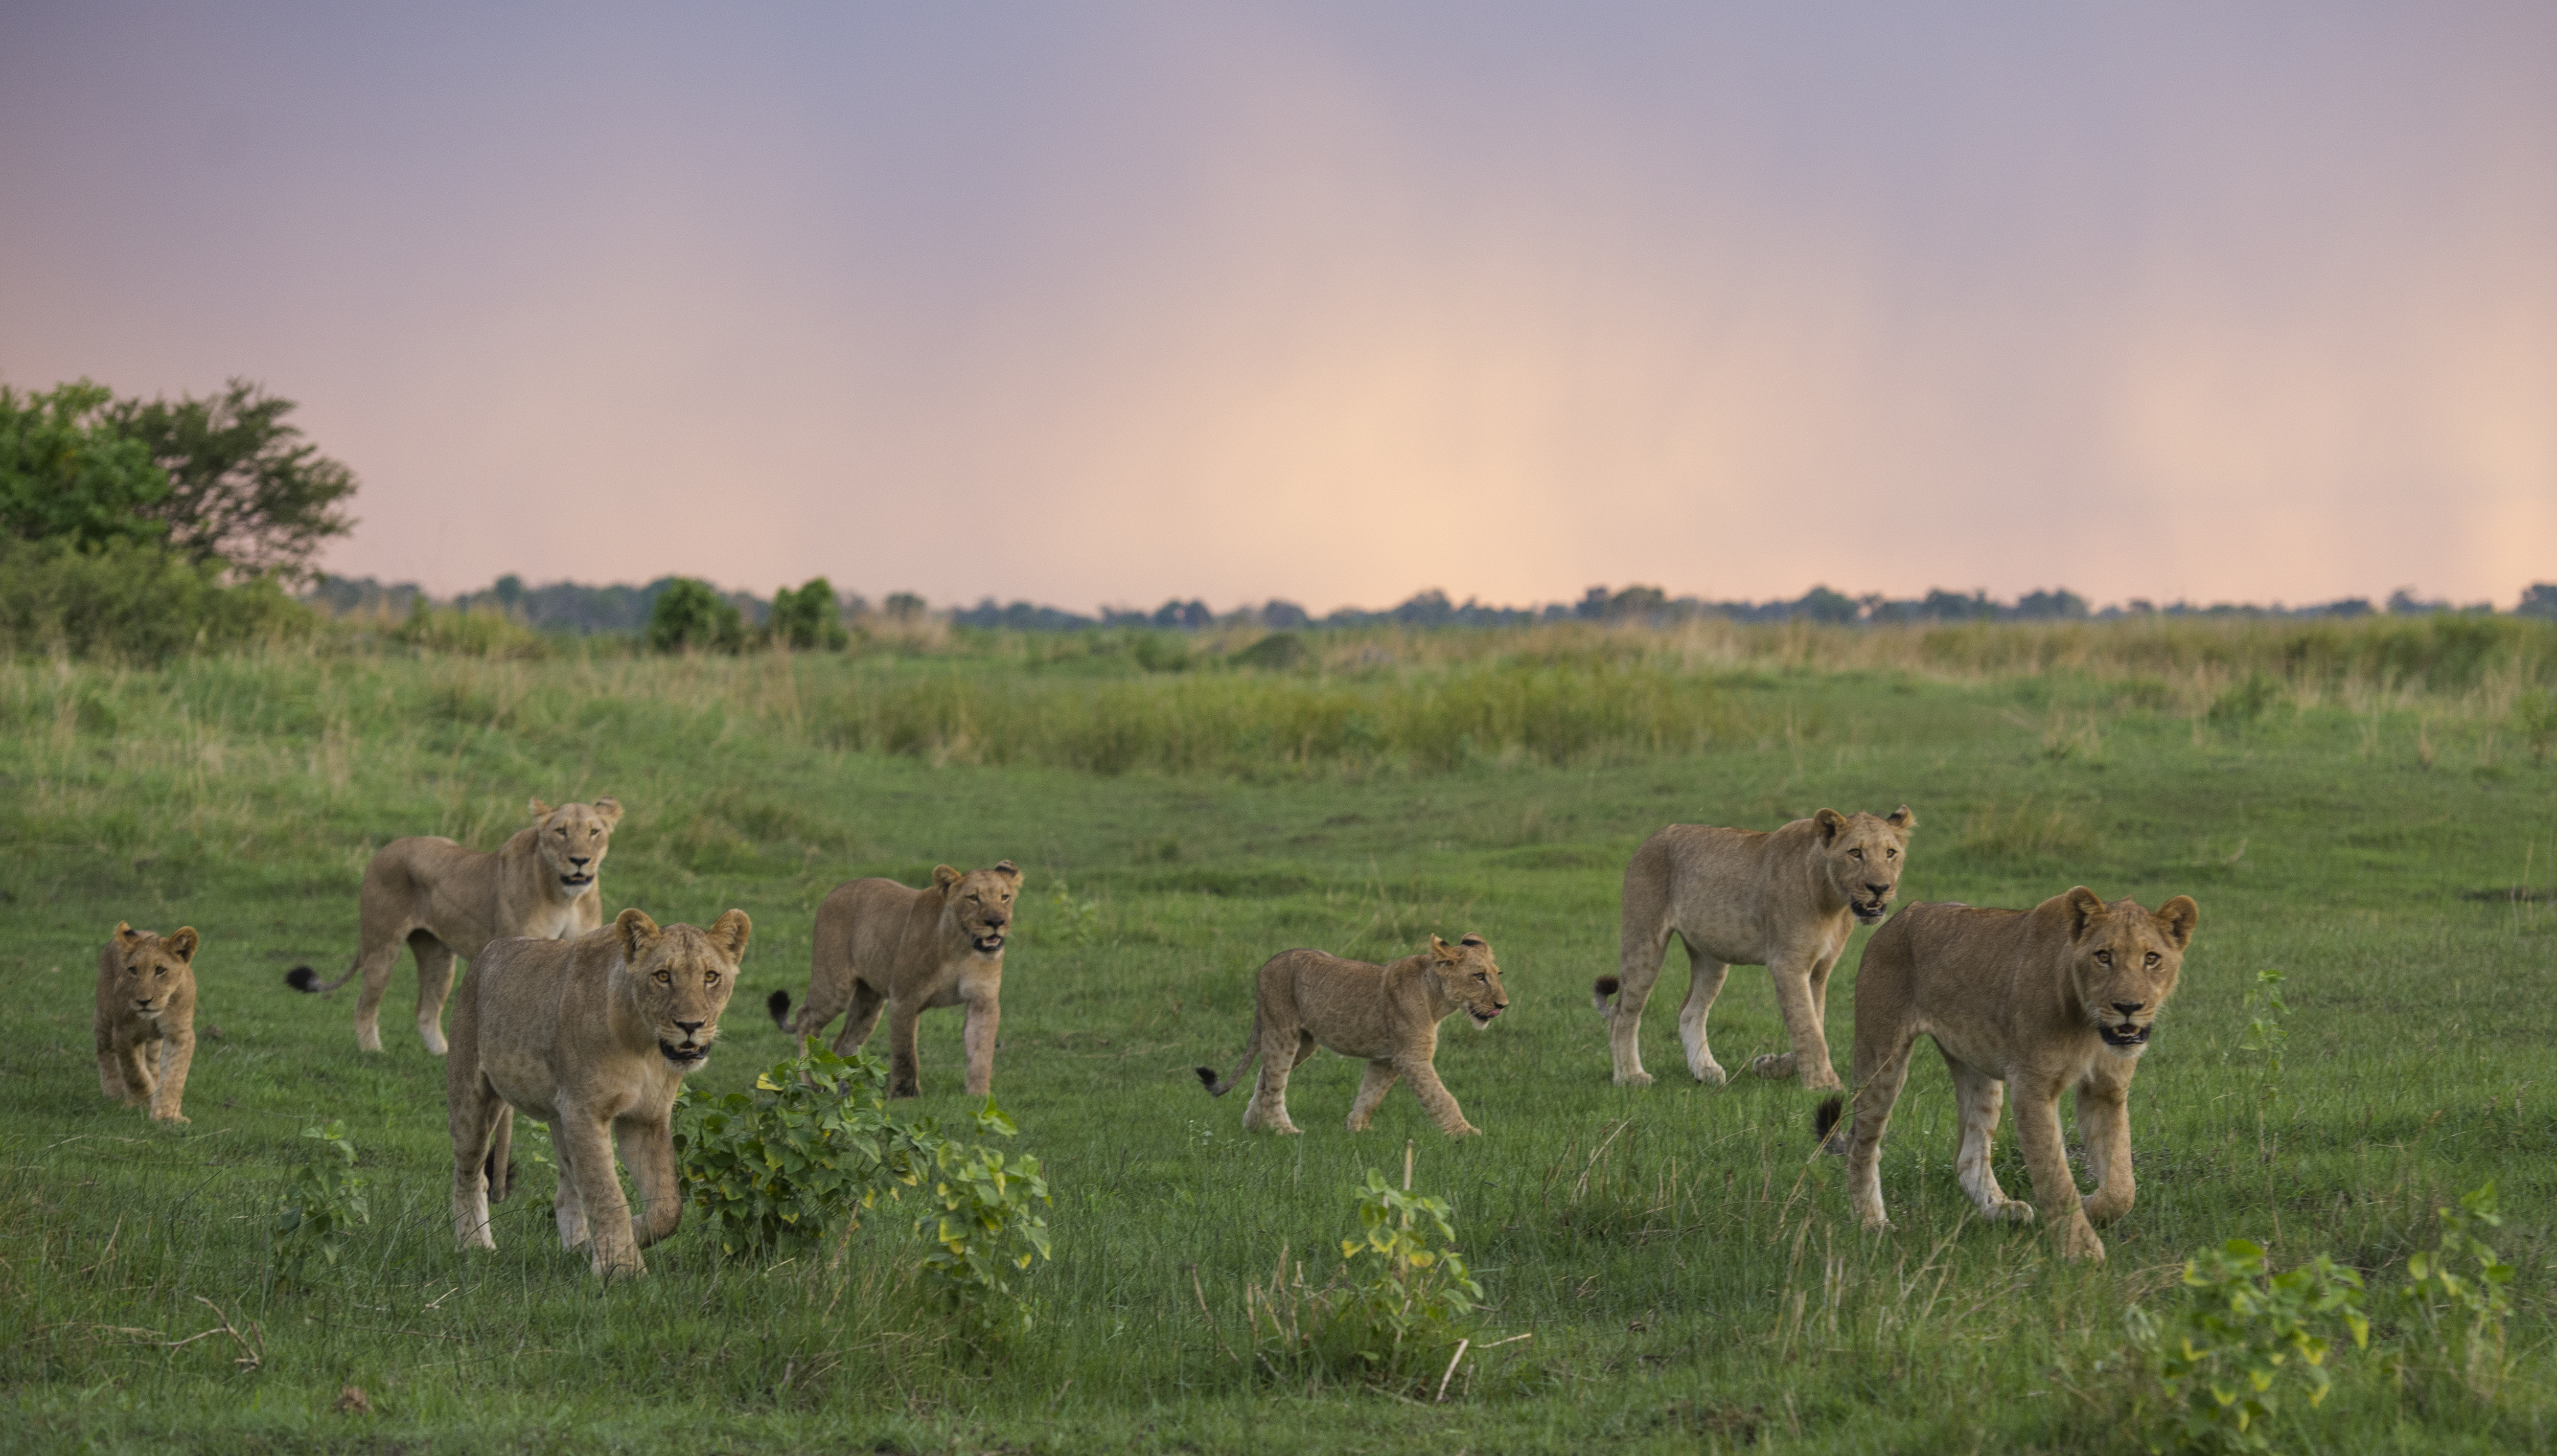 "Group of female lions with cubs walking"